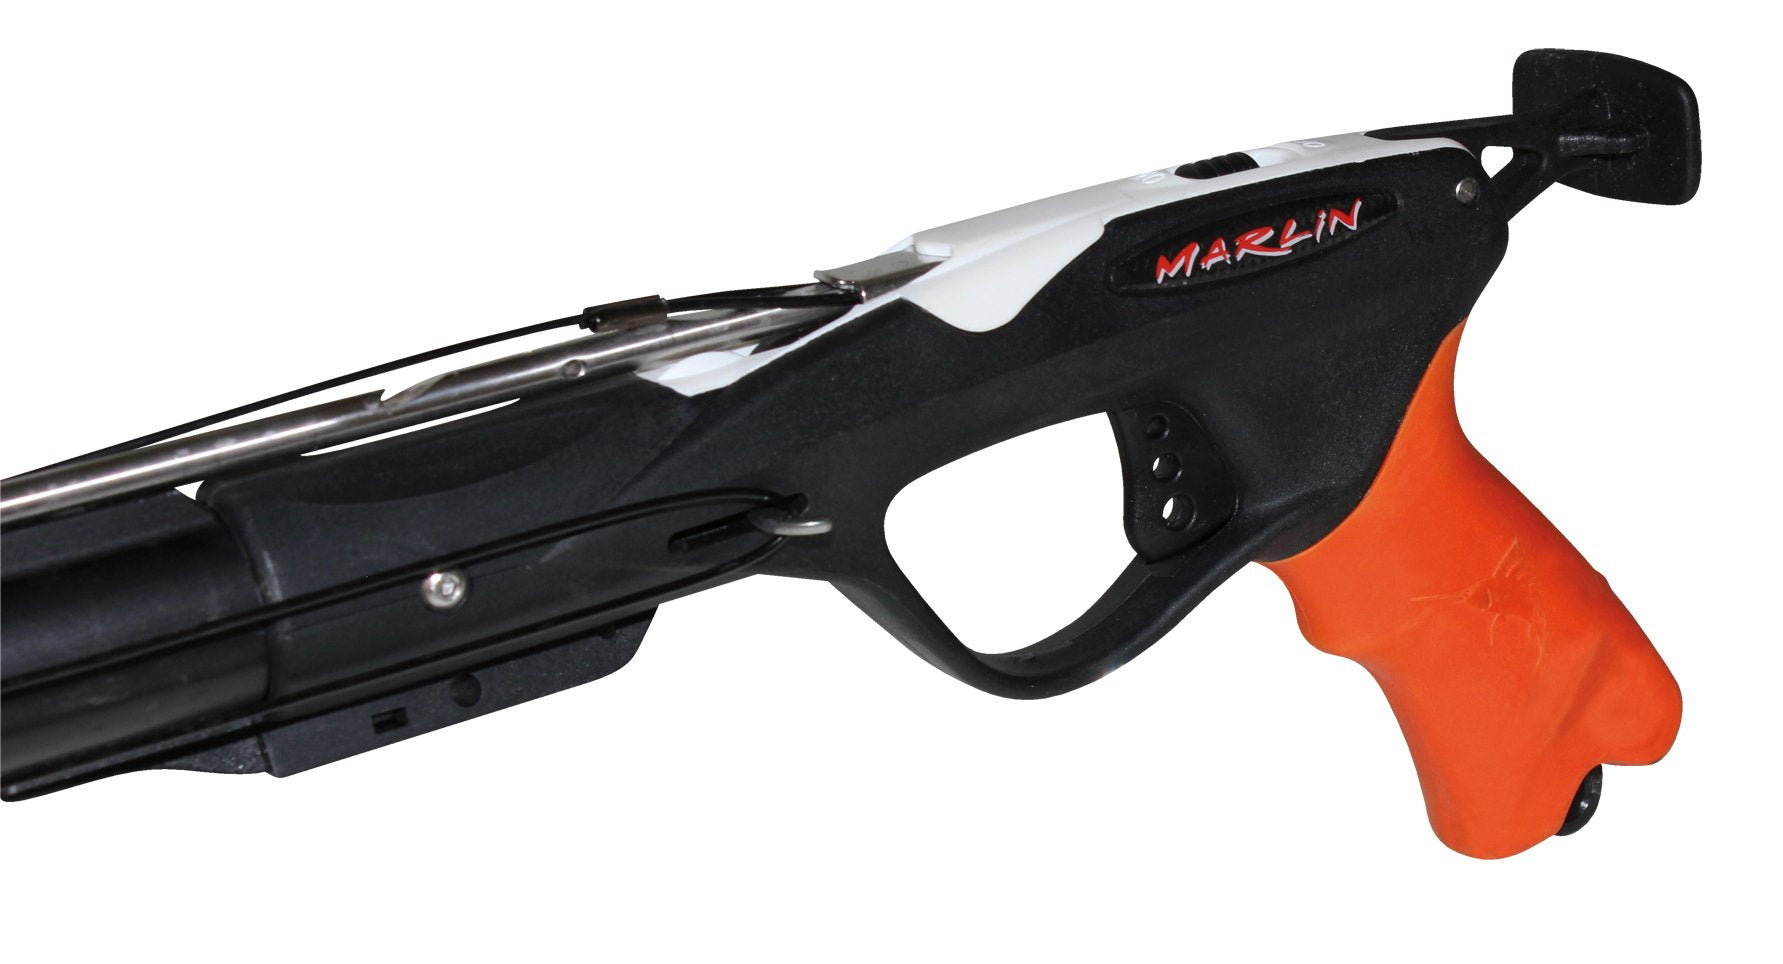 Beuchat Marlin Evil Speargun - Spearfishing Experts